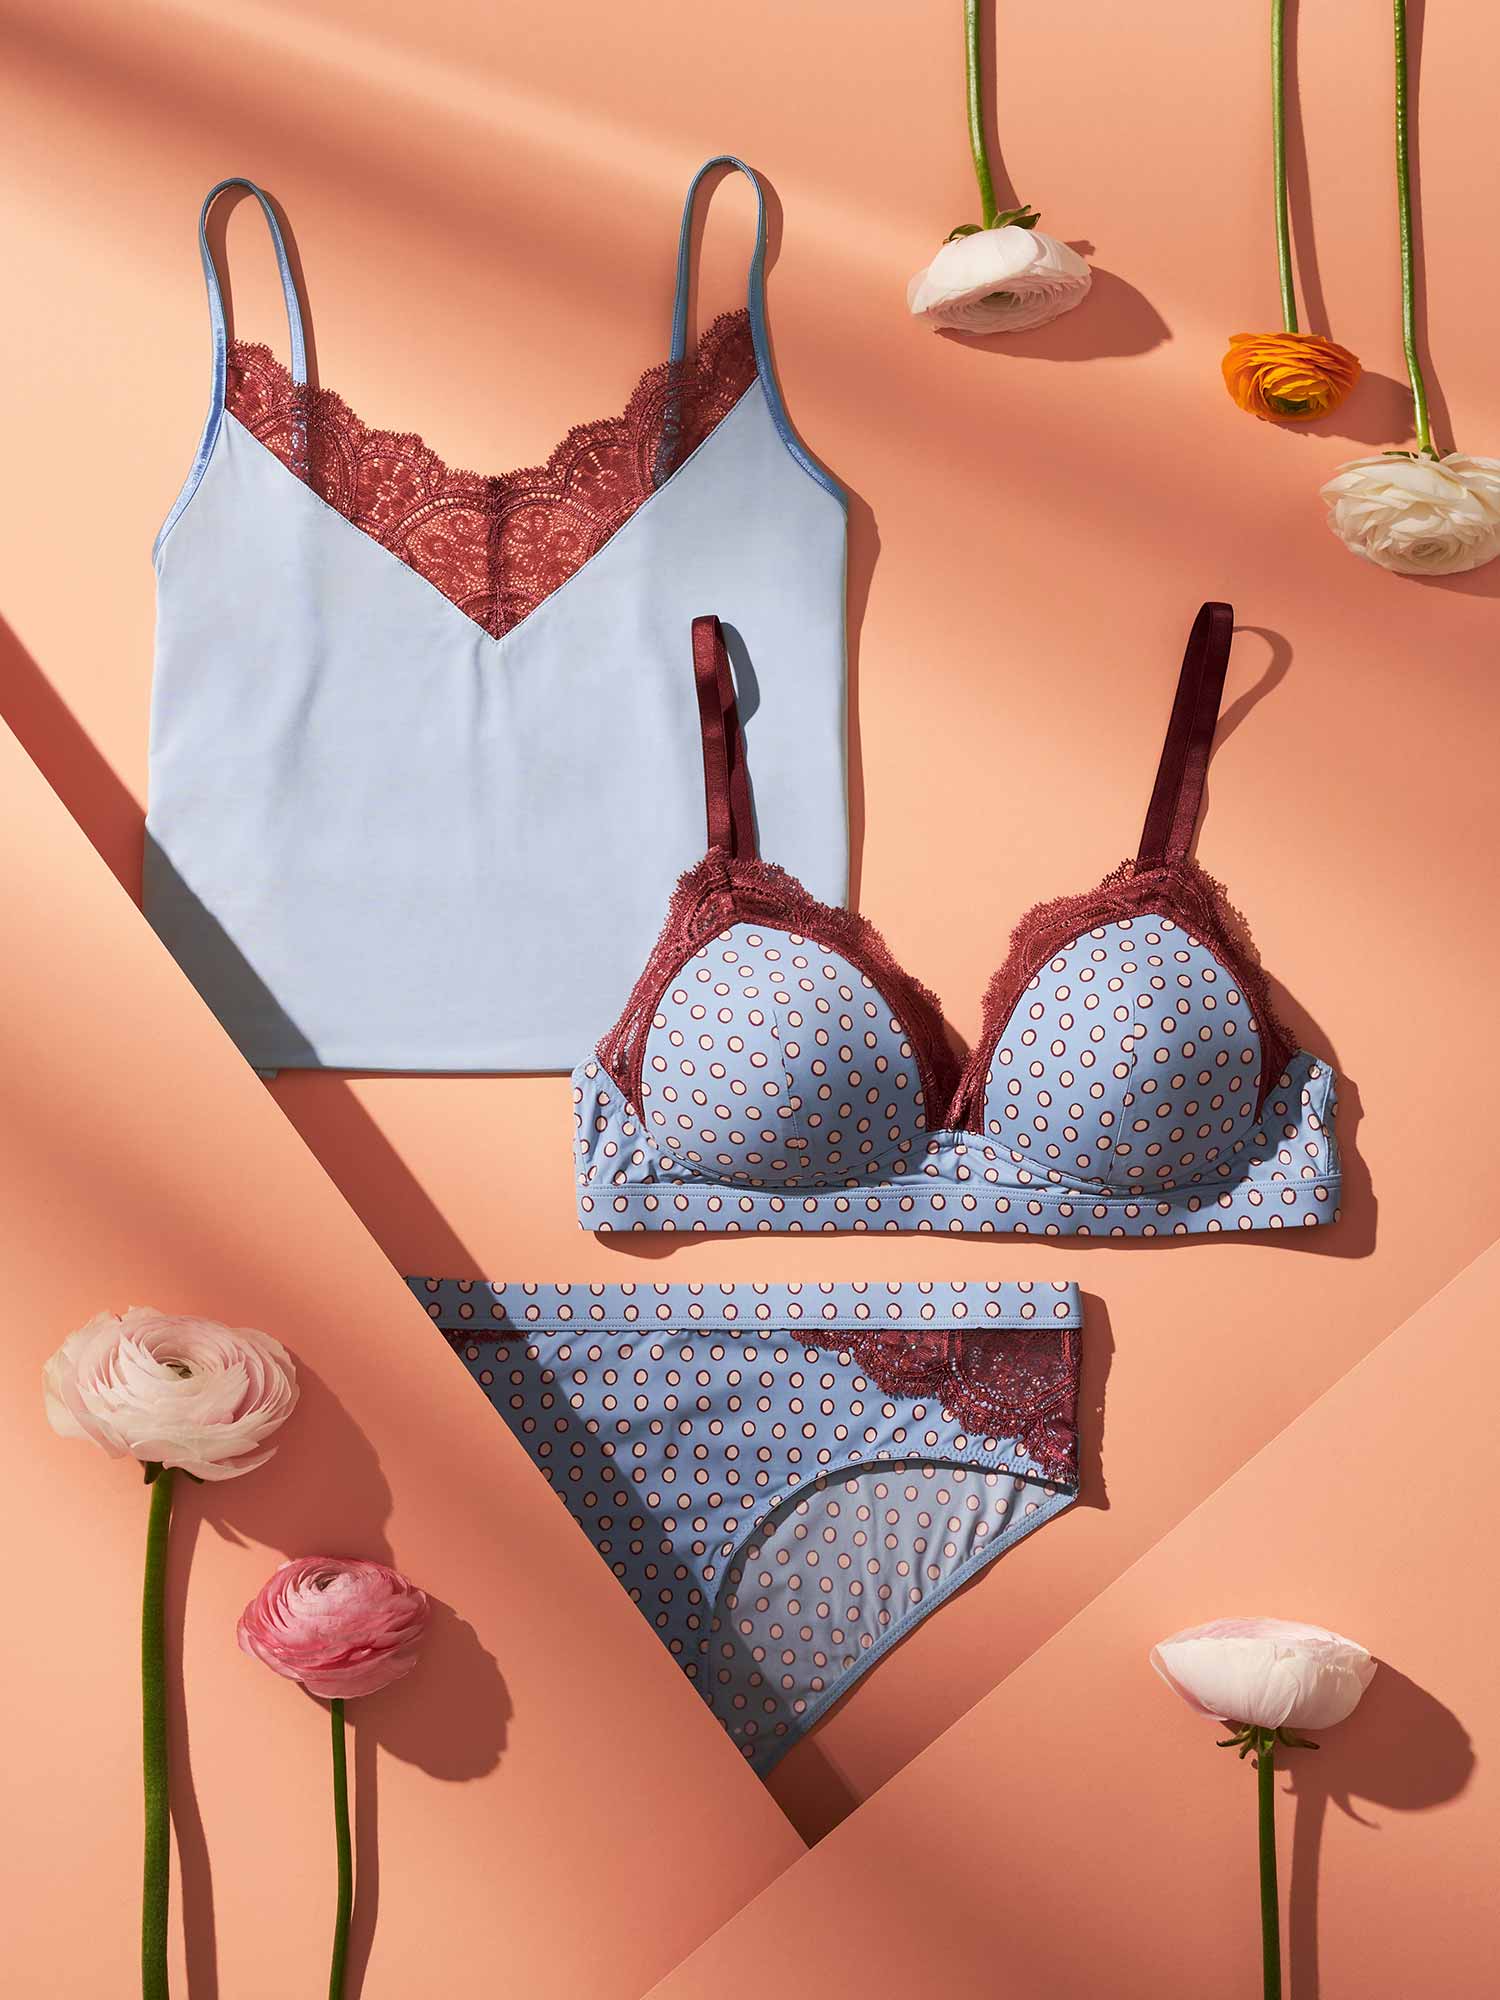 The most beautiful spring lingerie looks for ladies | mey®